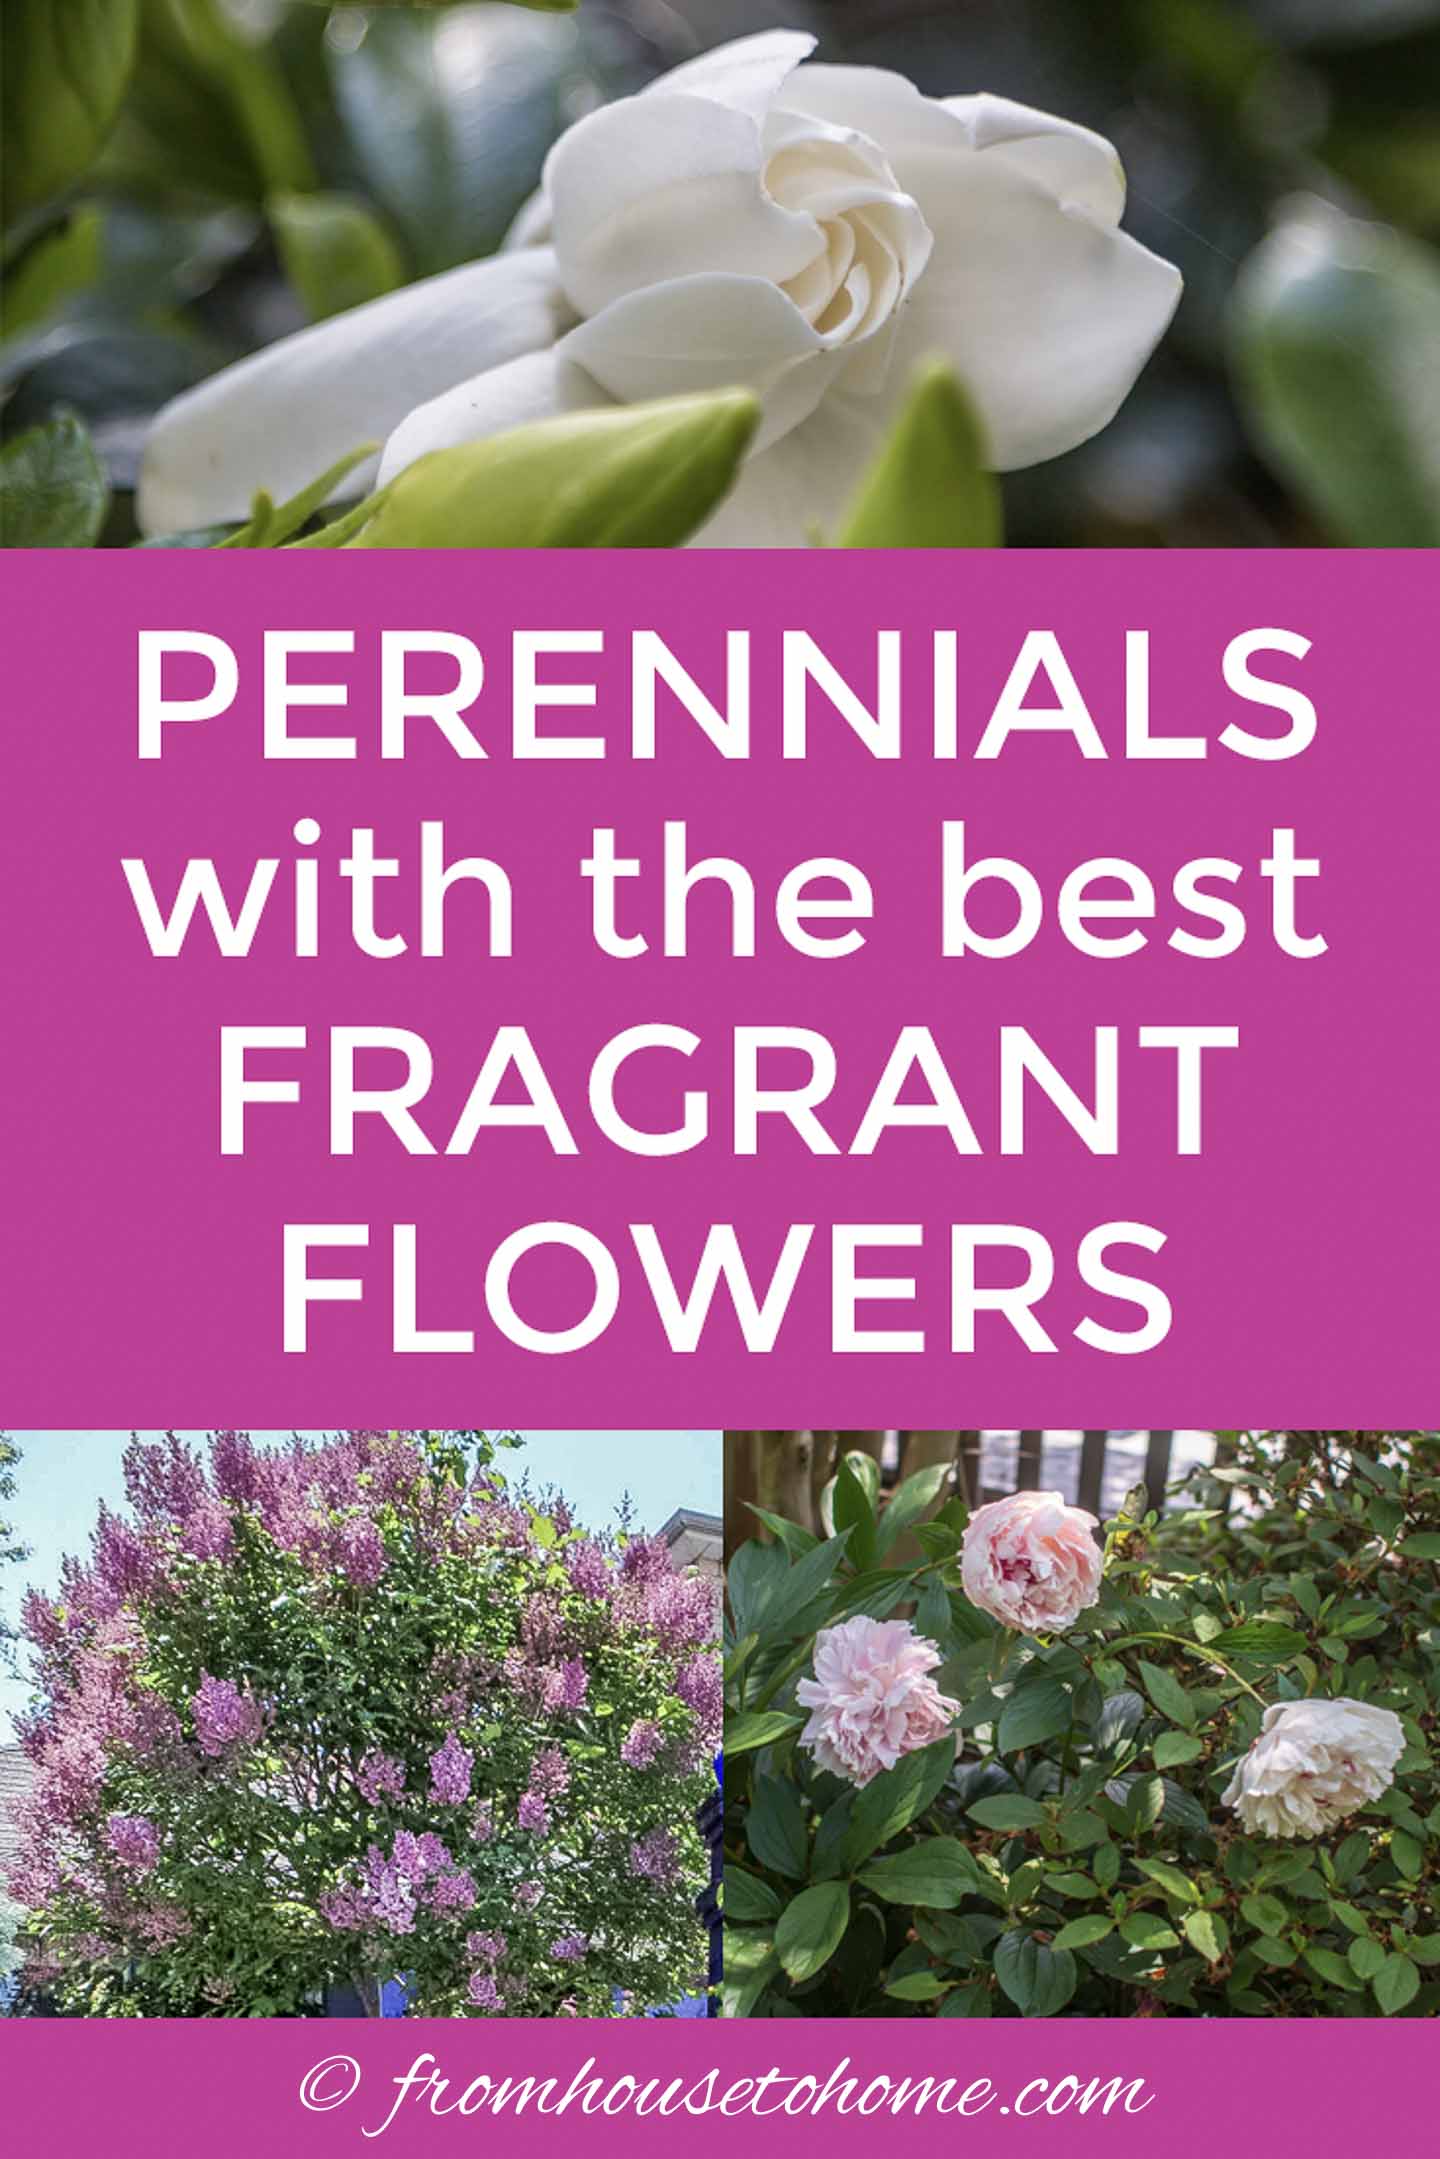 Fragrant Flowers: 10 Perennial Plants With The Most Beautiful Scent ...